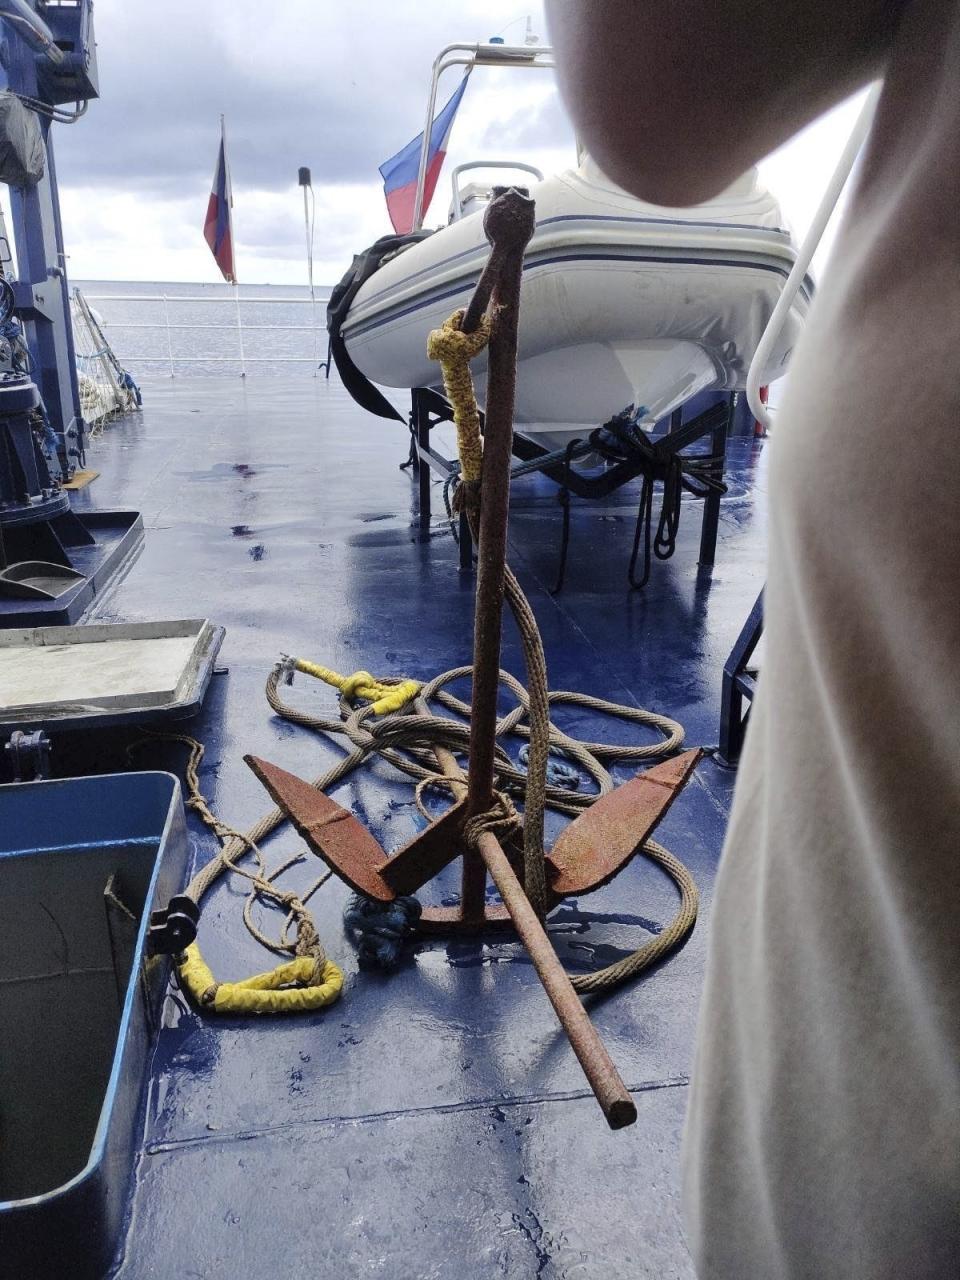 This undated photo provided on Sept. 26, 2023, by Philippine Coast Guard shows the anchor used to hold the floating barrier which were removed by the coast guard diver, in the Scarborough Shoal. The Philippine coast guard said Monday, Sept. 25, it has complied with a presidential order to remove a floating barrier placed by China’s coast guard to prevent Filipino fishing boats from entering a lagoon in a disputed shoal in the South China Sea. (Philippine Coast Guard via AP)